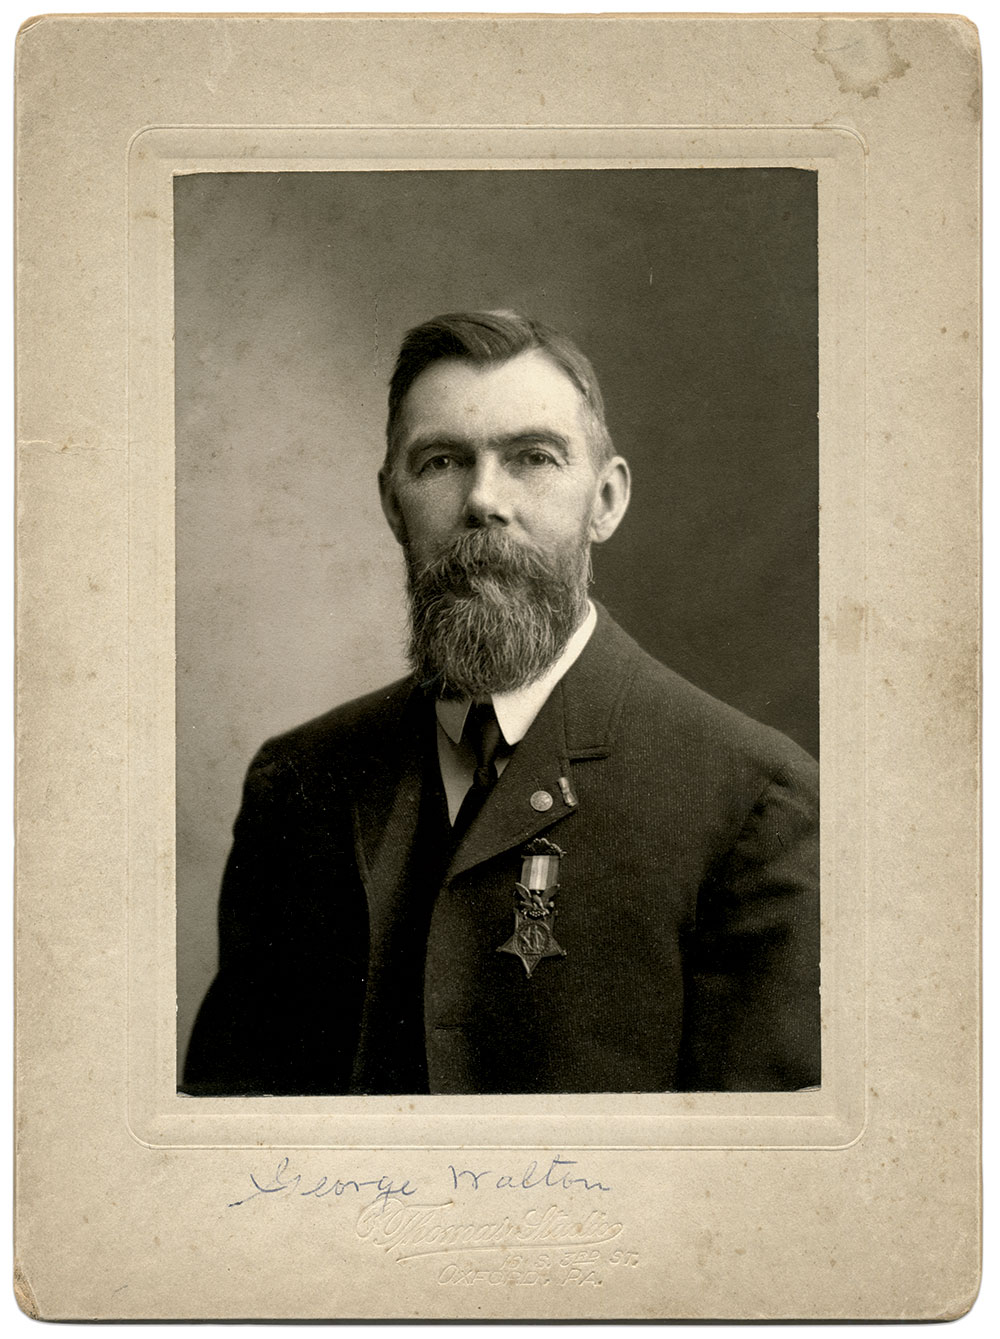 Walton wearing his Medal of Honor, circa 1902. Photograph by The Thomas Studio of Oxford, Pa. Faye and Ed Max Collection.